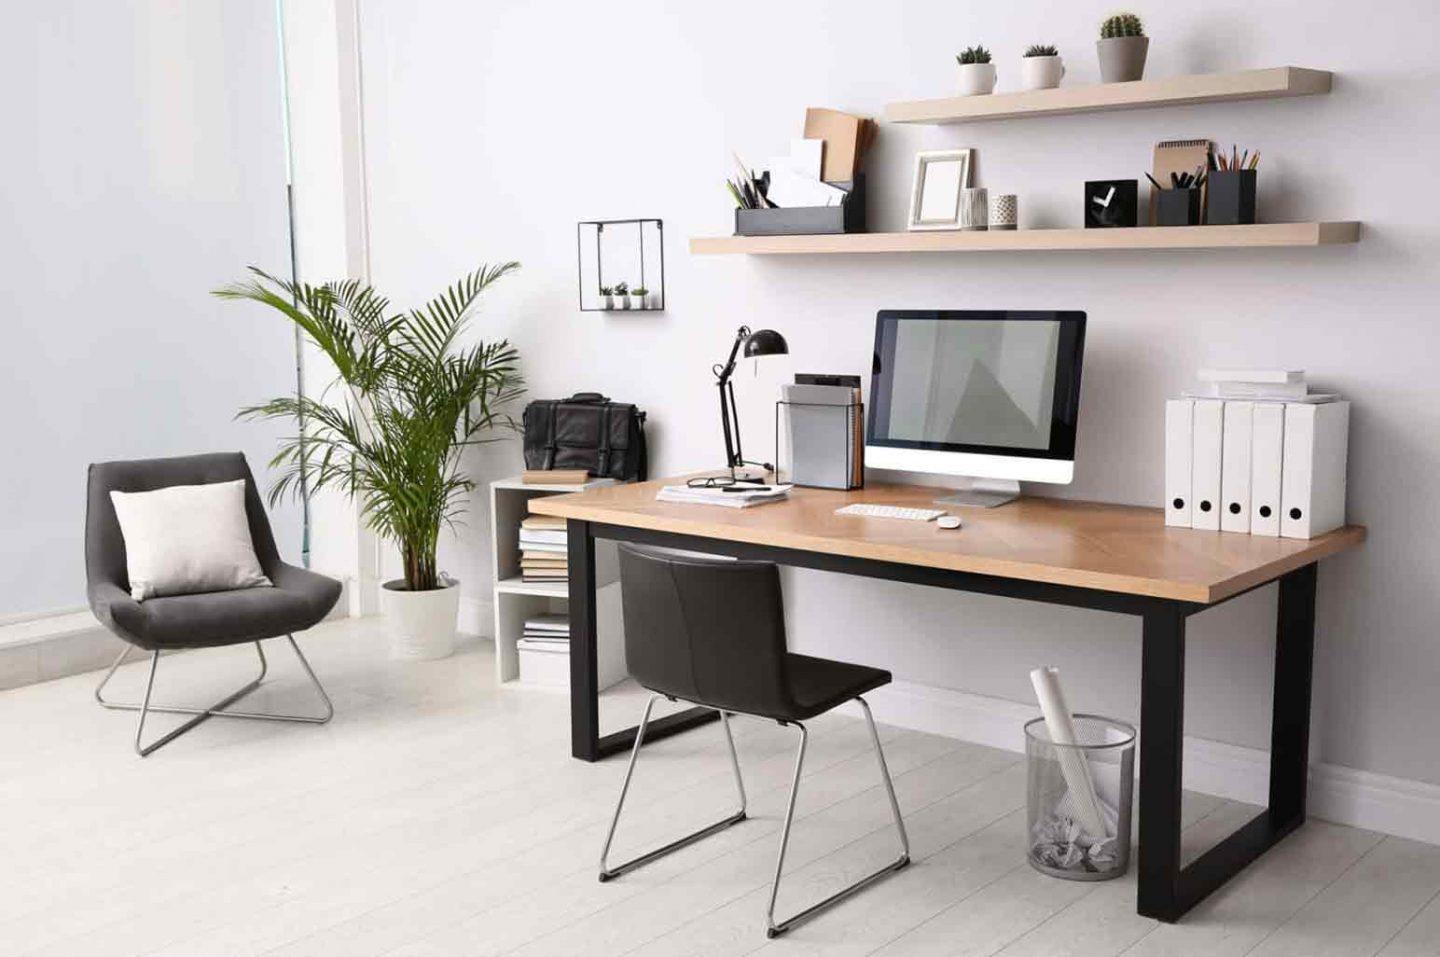 Solutions to Make Working Space Comfortable